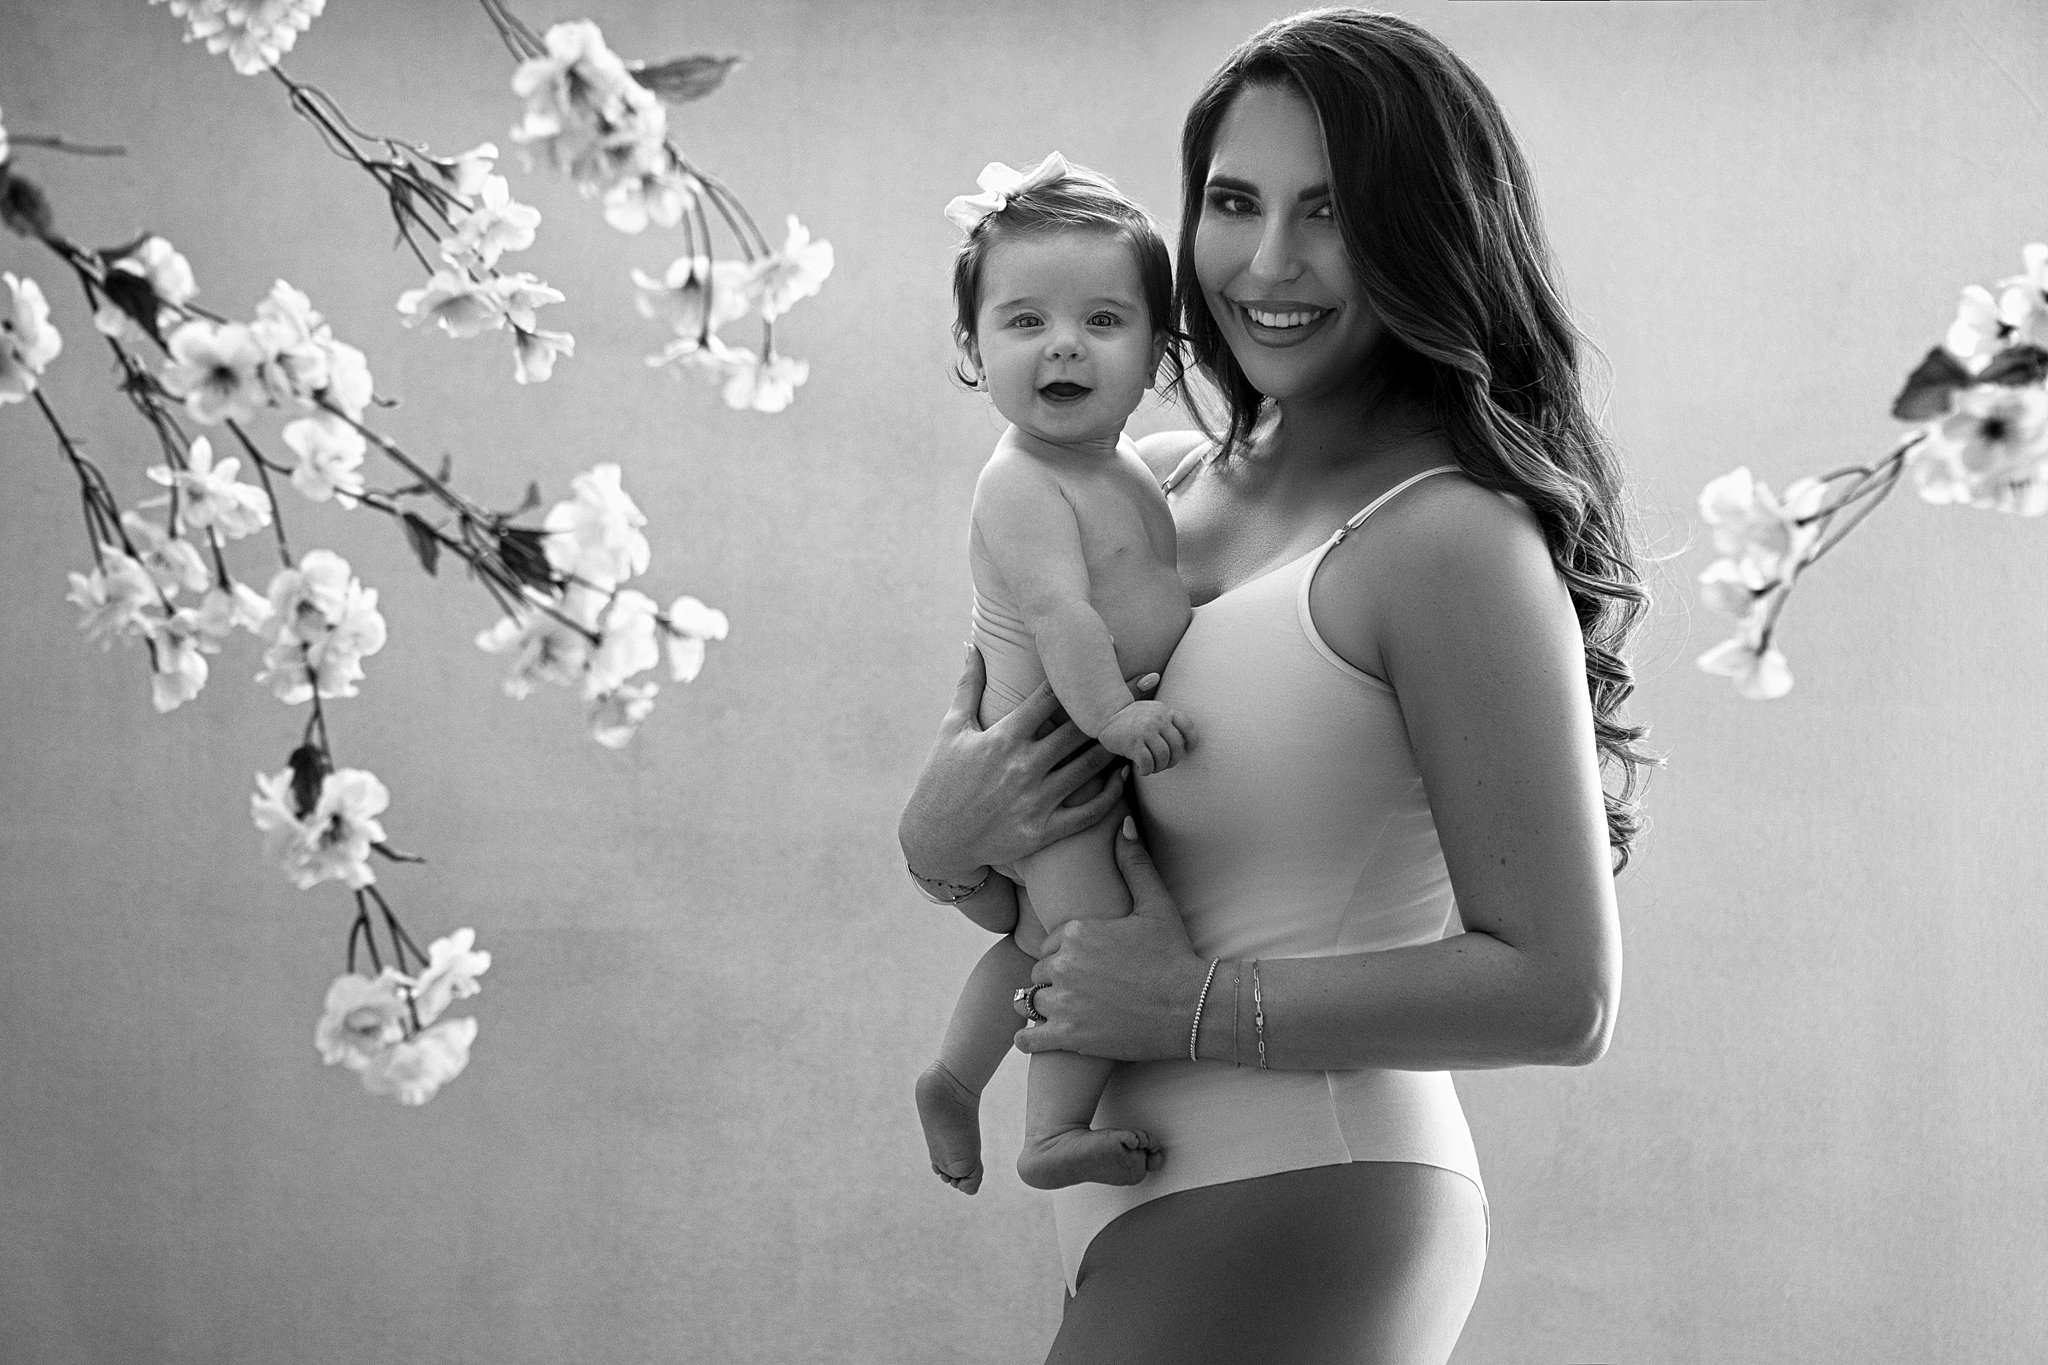 A woman in a white one-piece suit stands amongst some cherry blossoms in a studio while holding her toddler baby